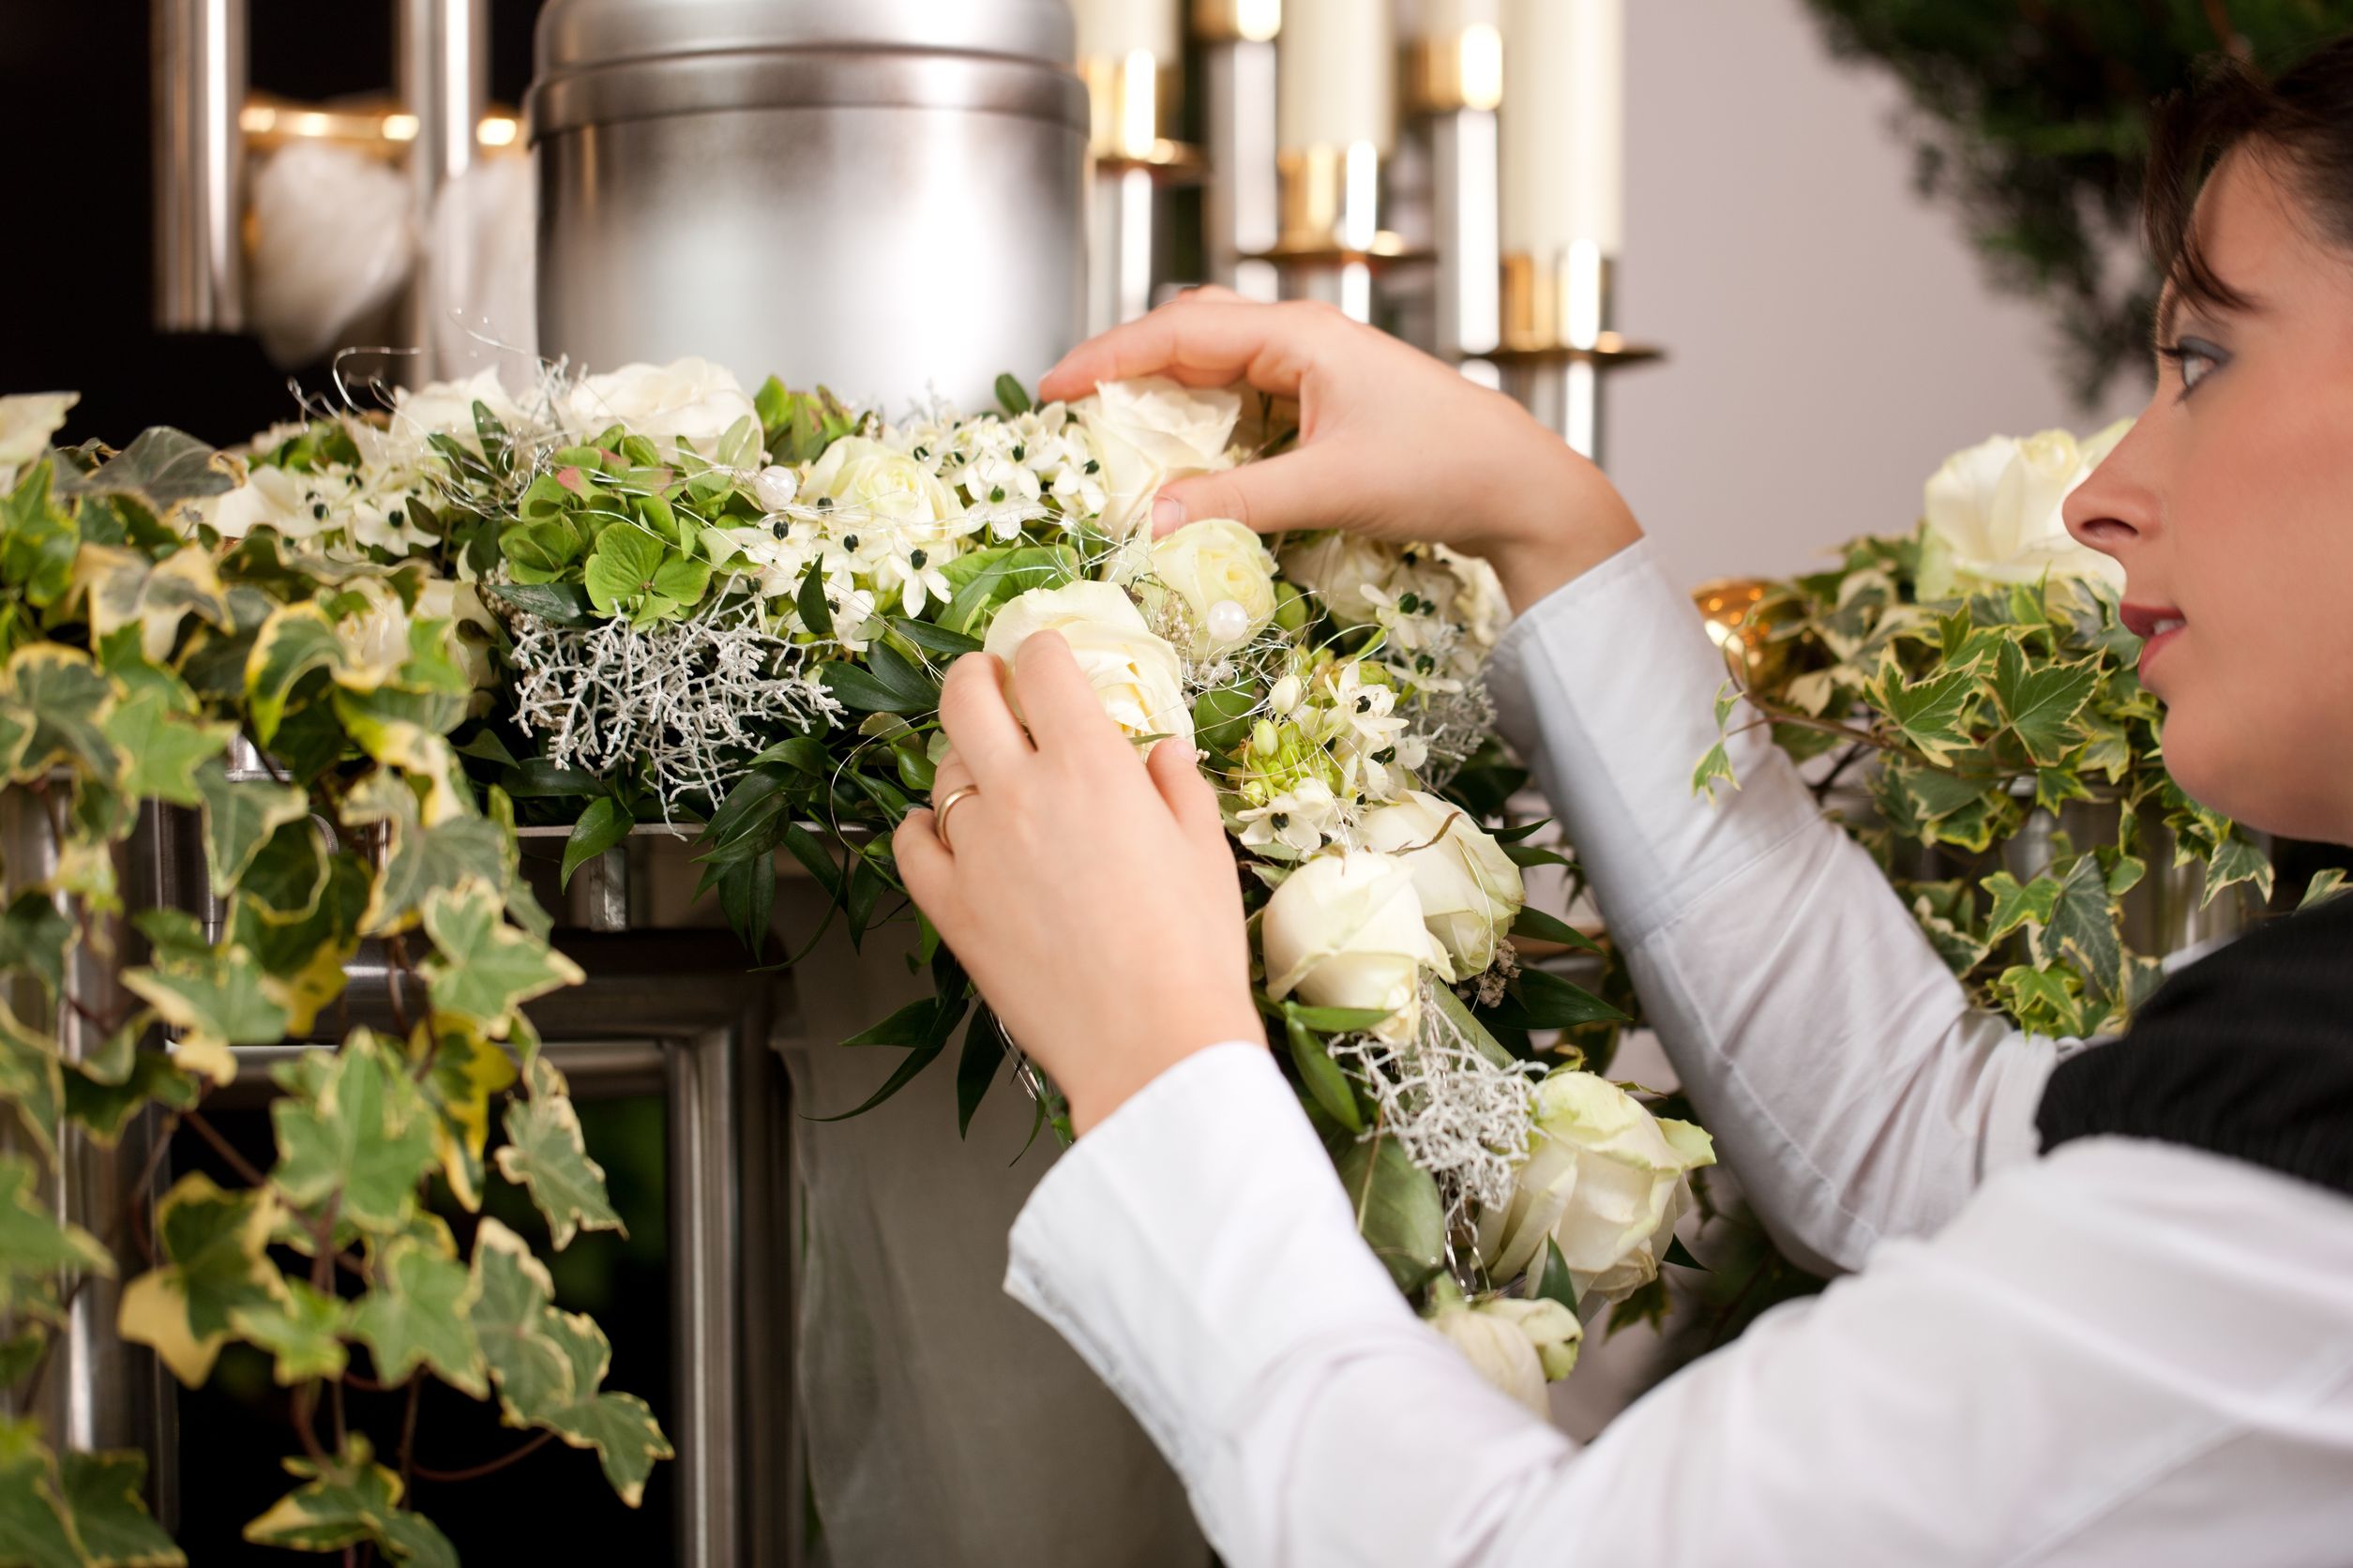 Plan Your Cremation Funeral Service in Advance